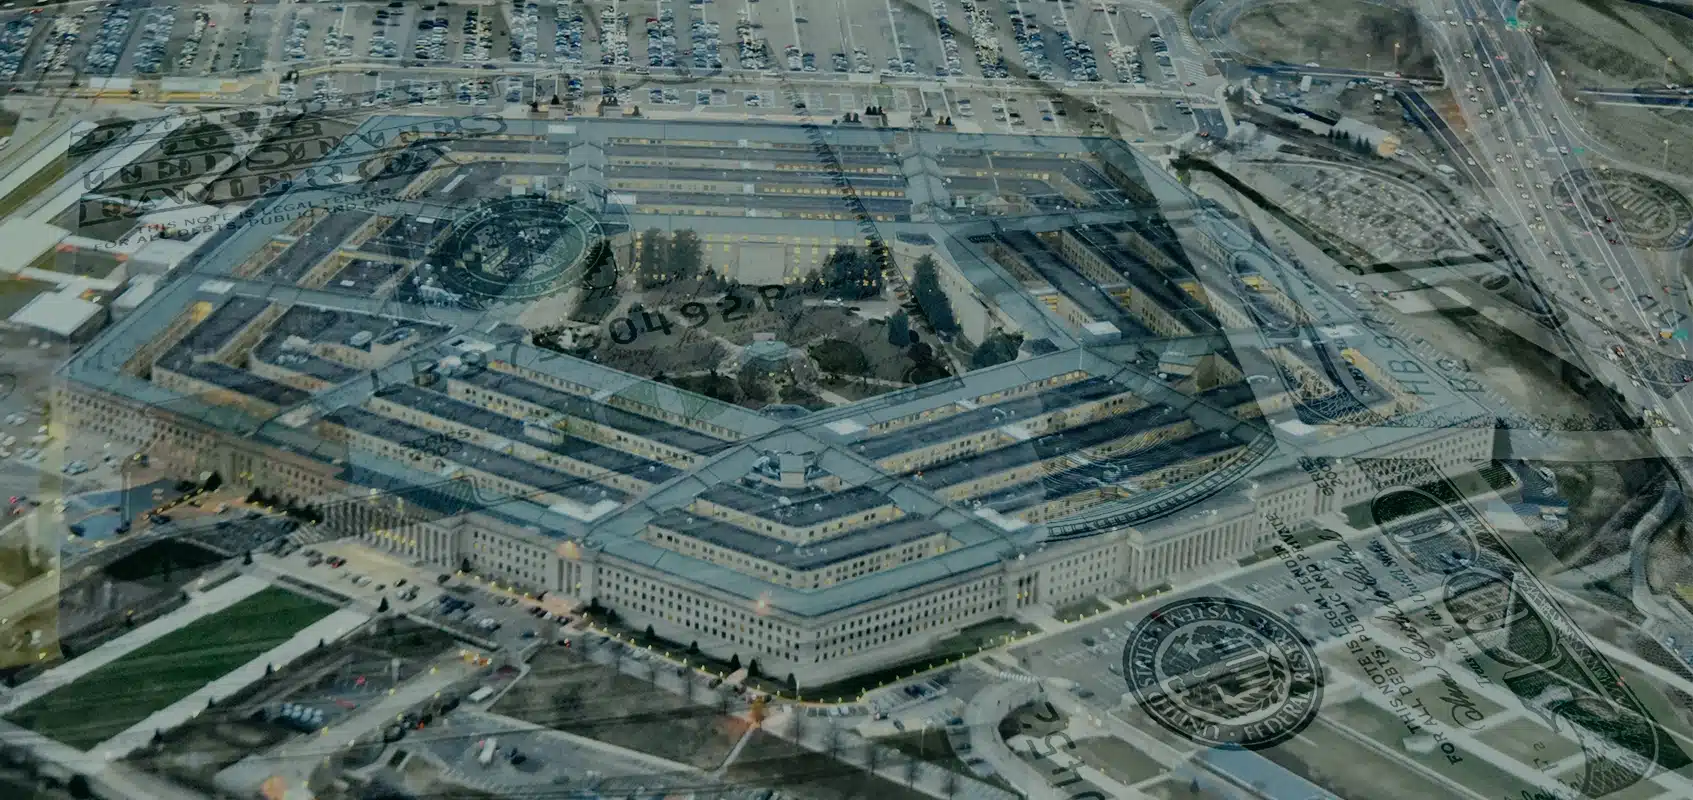 Overhead view of the Pentagon with 100 dollar bills overlaid